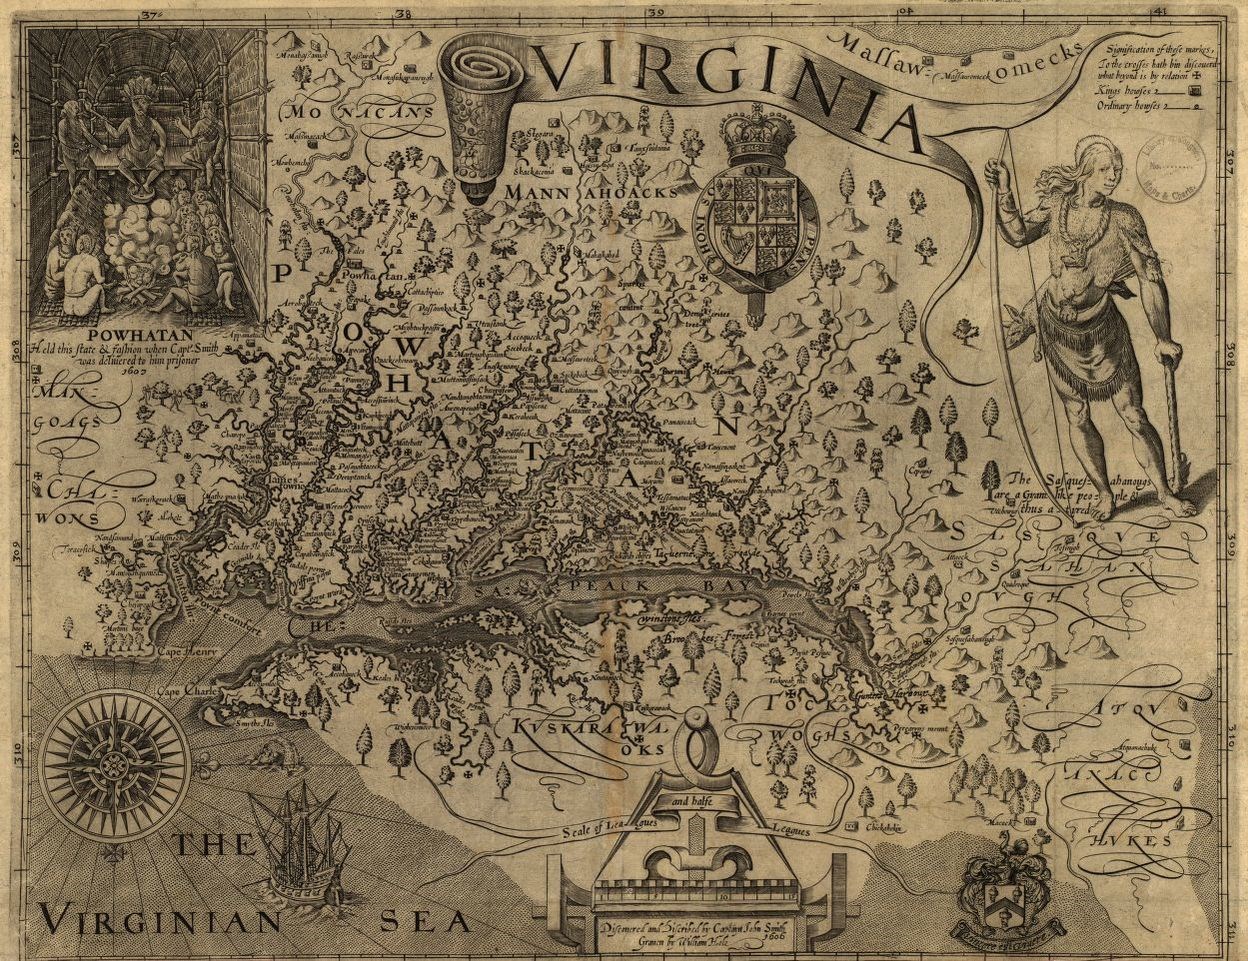 John Smith’s 1608 map of Virginia zoomed in on the region of modern-day Washington D.C. along the Potomac River. This map is oriented with north to the right of the map.  Native American settlements are depicted on the two opposing banks of the Potomac.